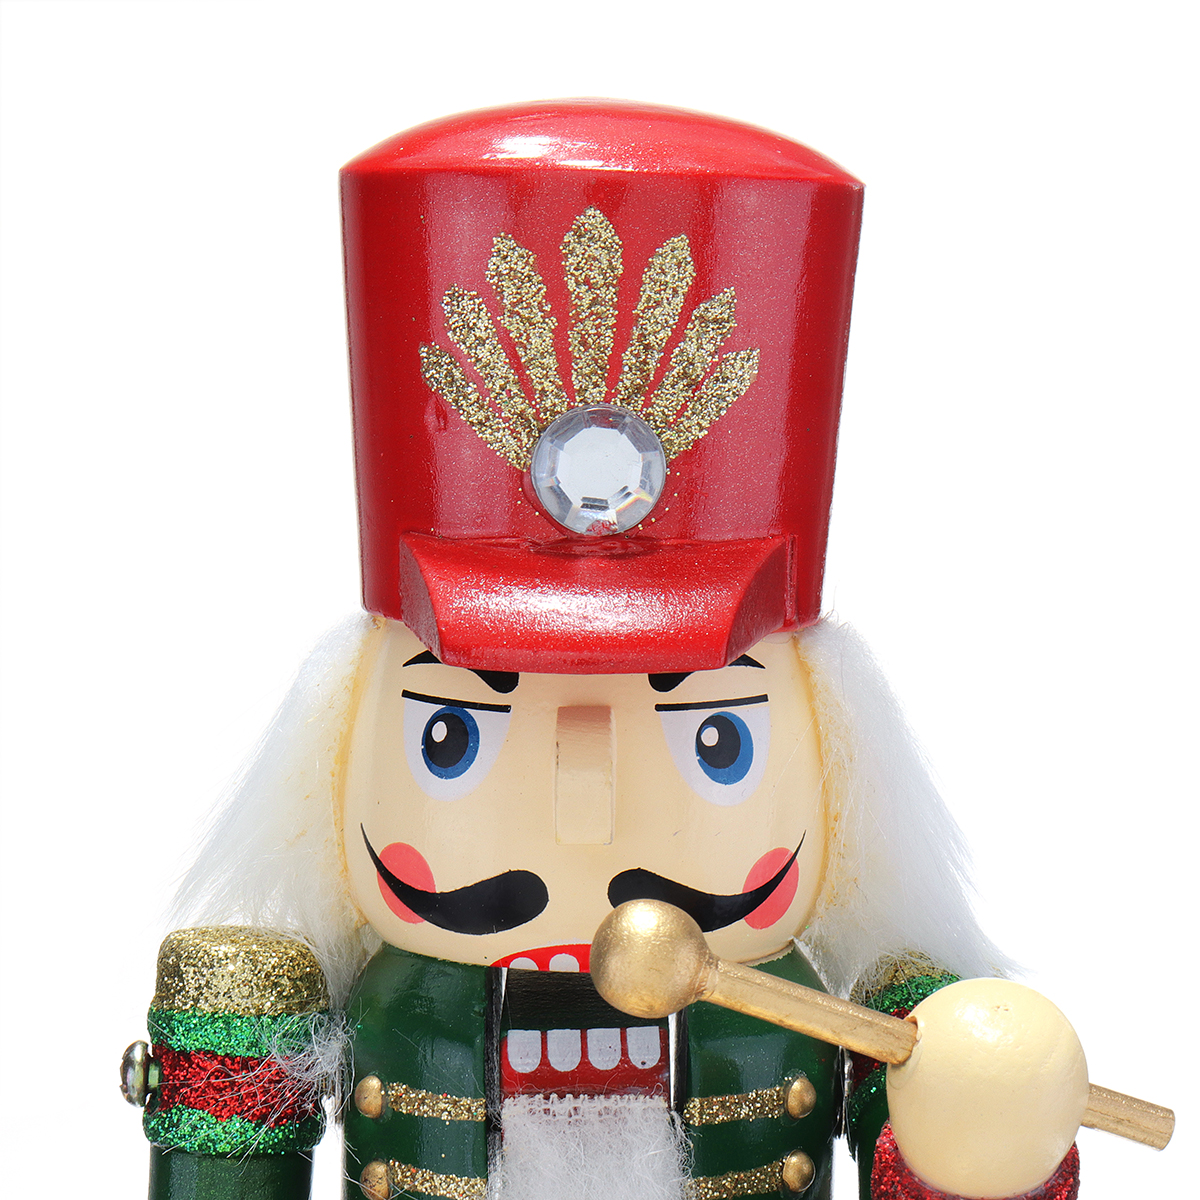 32CM-Wooden-Guard-Nutcracker-Soldier-Toy-Music-Box-Christmas-Decorations-Xmas-Gift-1605612-6